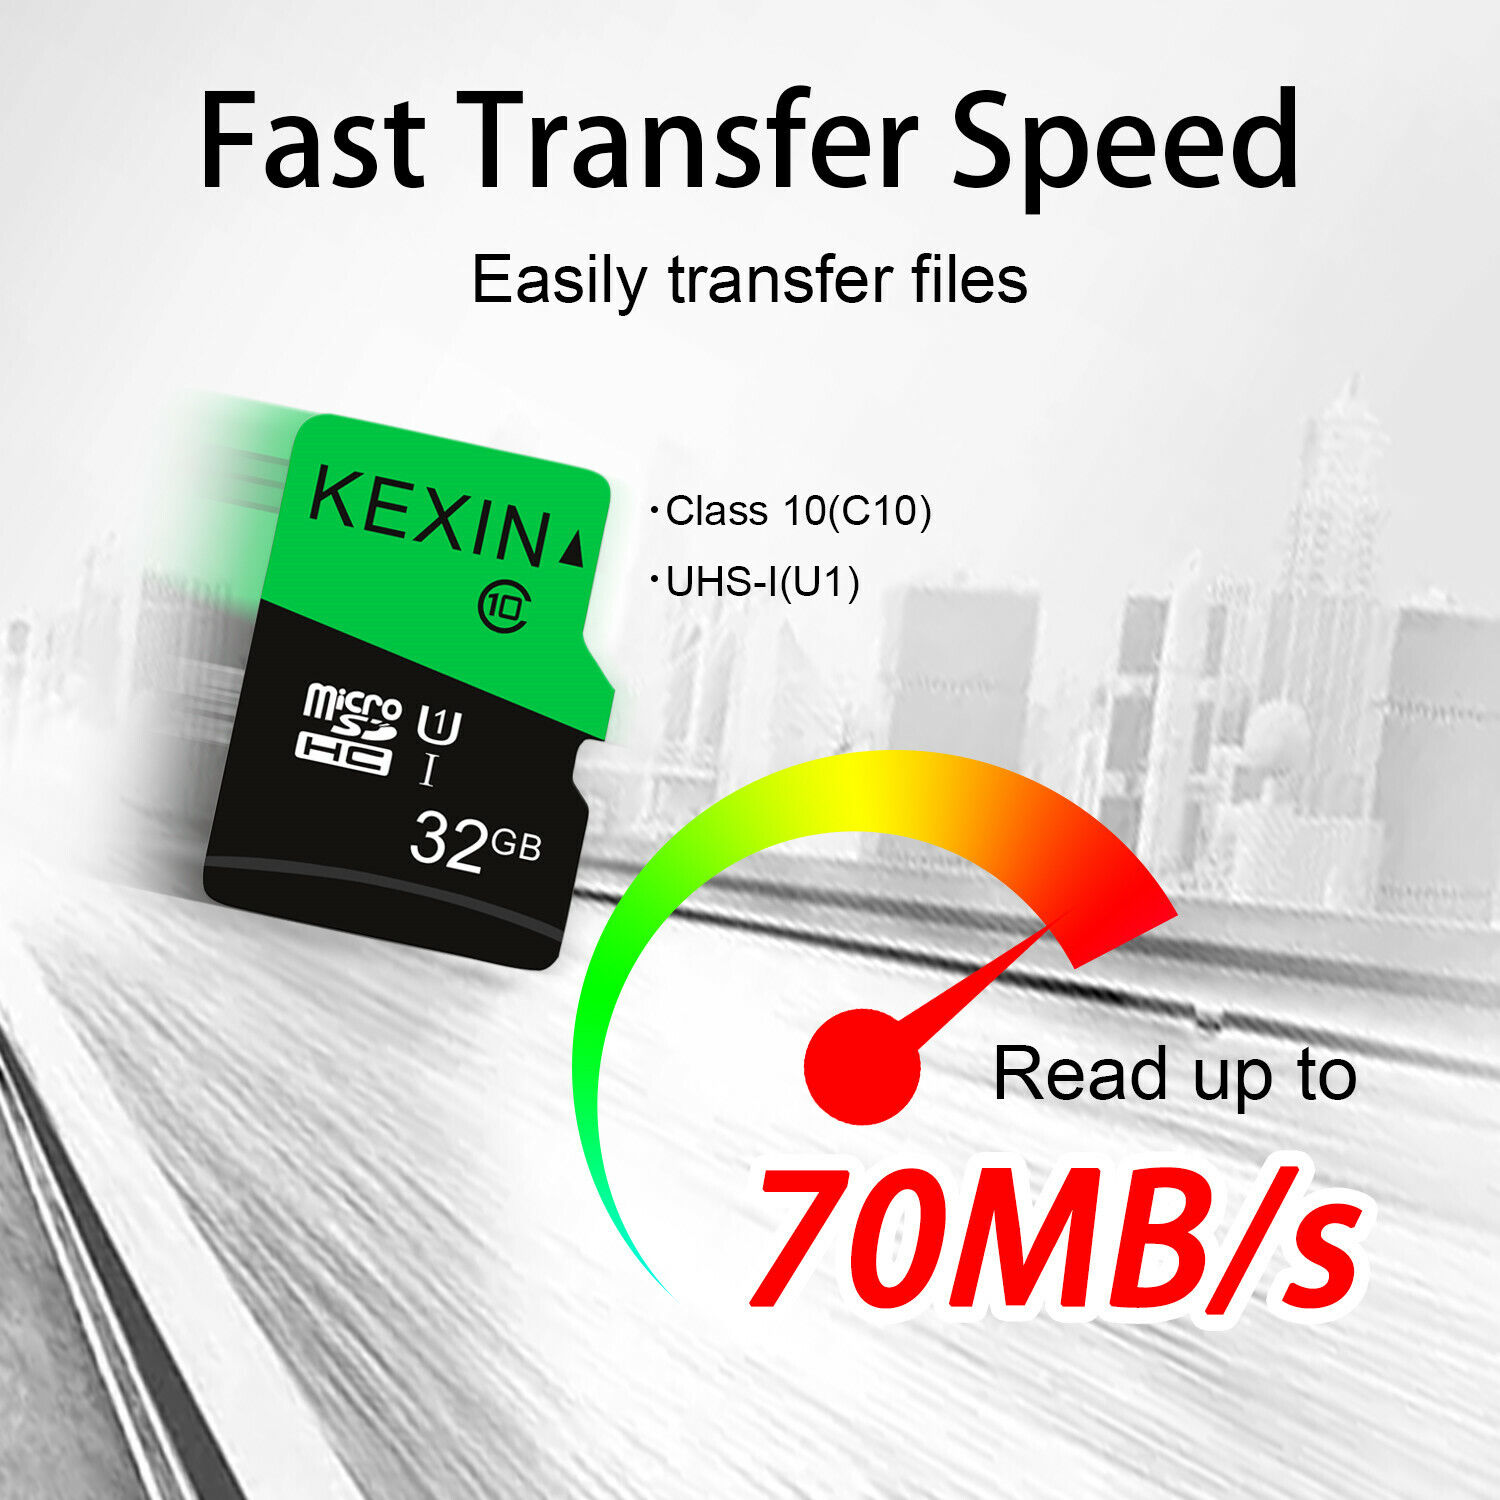 3Pack 32GB Micro SD TF Card SDHC Class 10 Flash Memory Card For Phone Camera Kexin - фотография #7